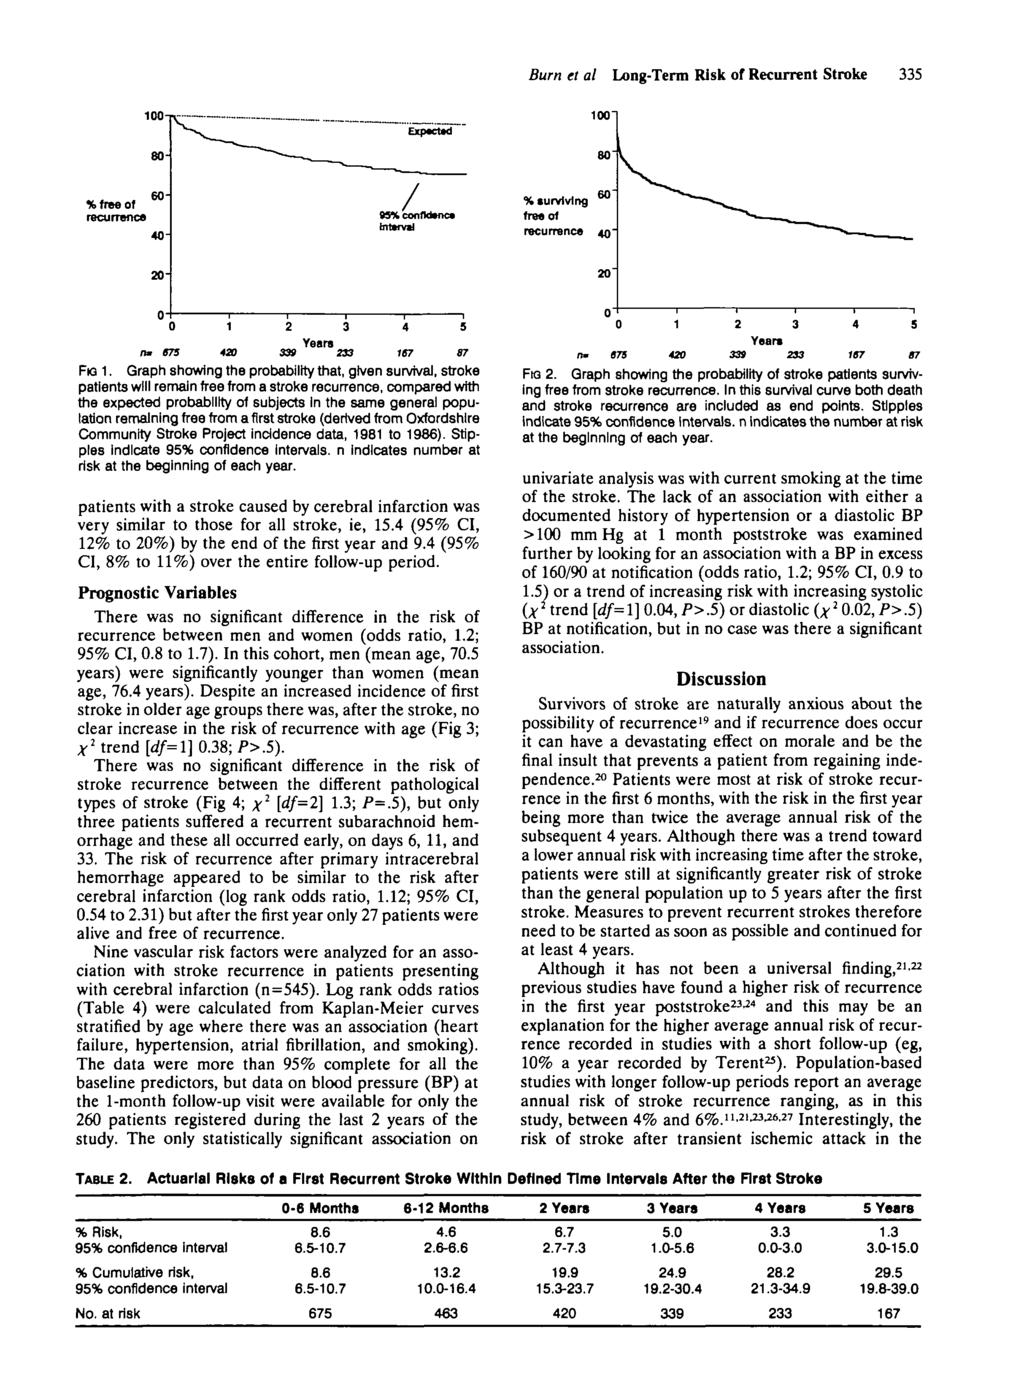 Burn et al Long-Term Risk of Recurrent Stroke 5 1" 8" % surviving free of recurrence 4 Downloaded from http://ahajournals.org by on January 1, 19 1 4 5 Years 675 4 * 167 87 FIG 1.